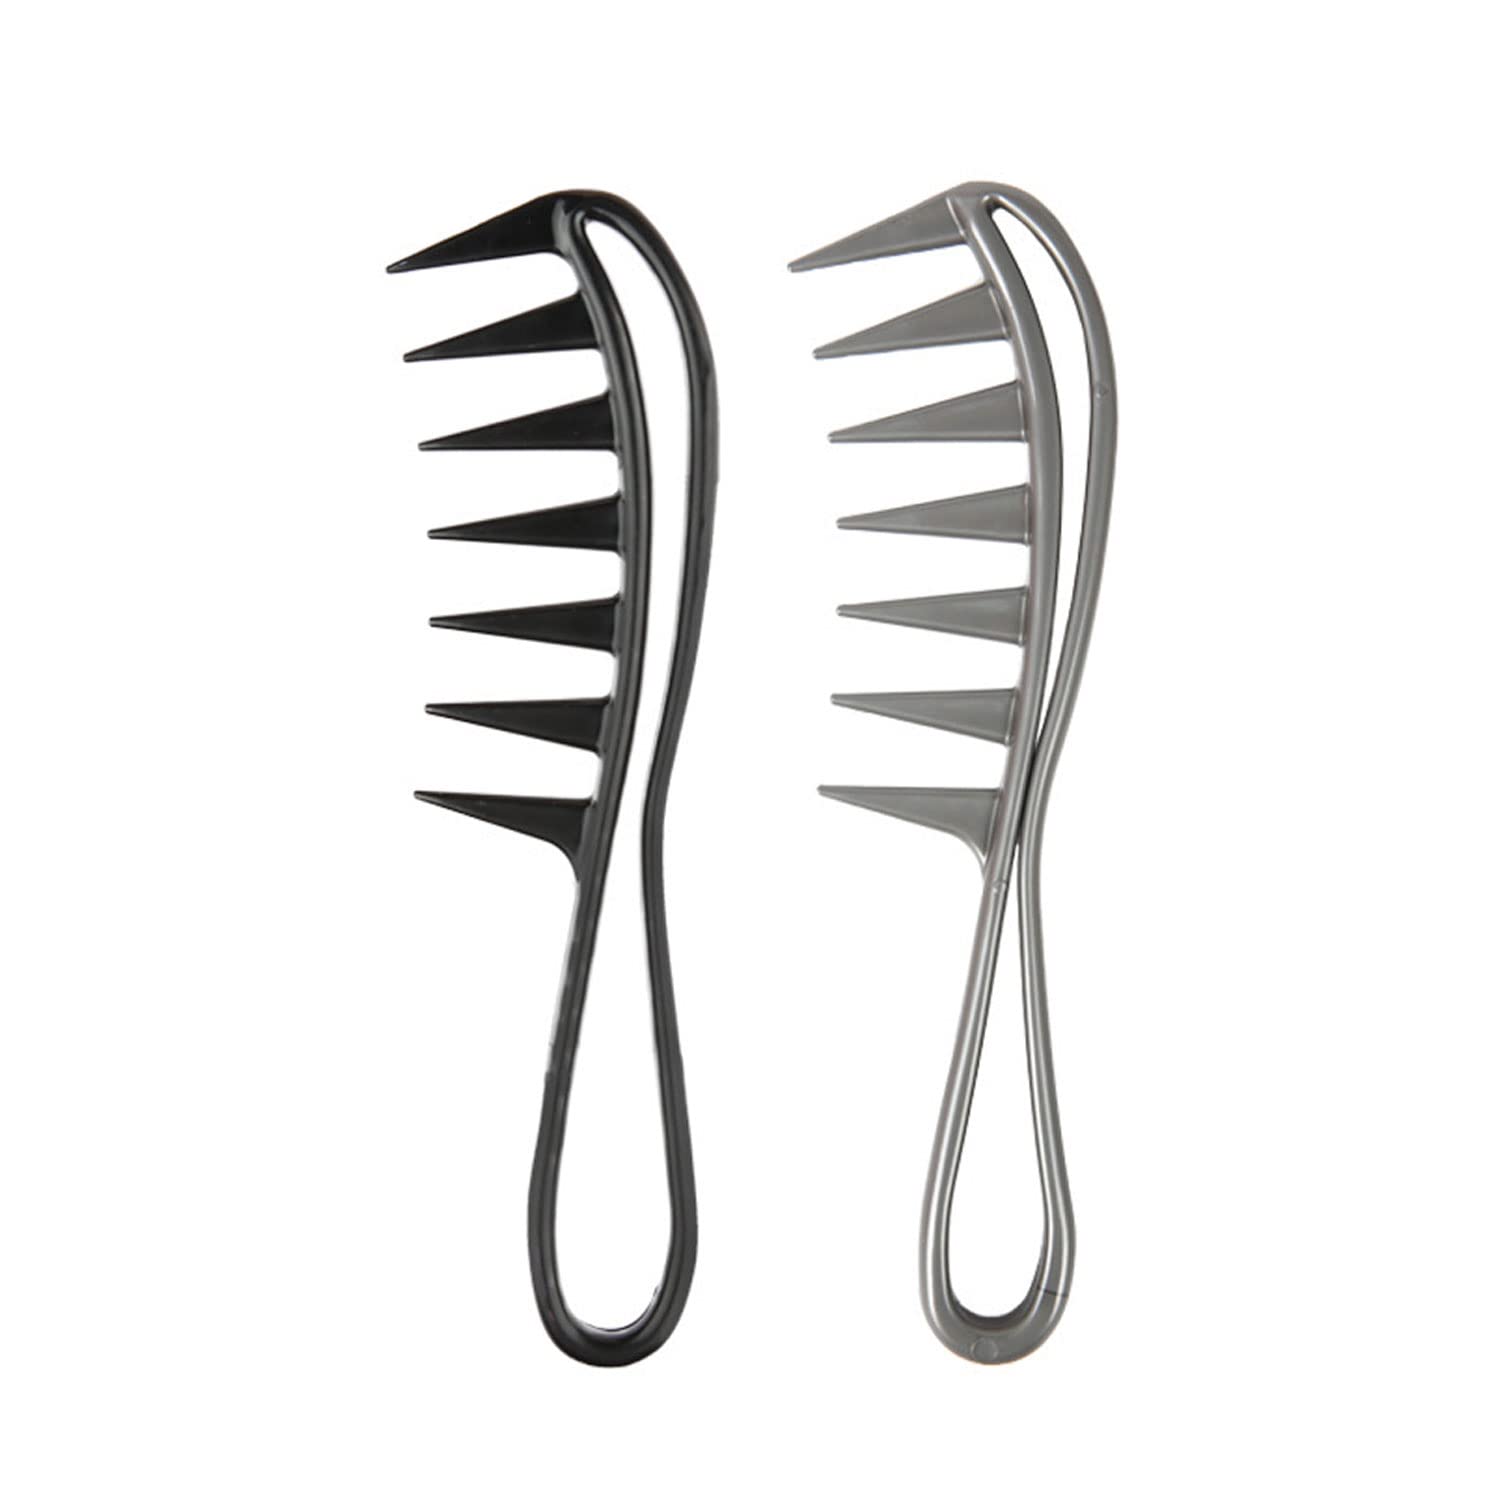 CAM2 Curling Comb, Wide Tooth Shark Tooth Comb, Pack of 2, Hairstyle Comb with Handle, Retro Comb, Afro Comb, Antistatic, for Hair Styling Tool (Black, Grey), ‎grey black